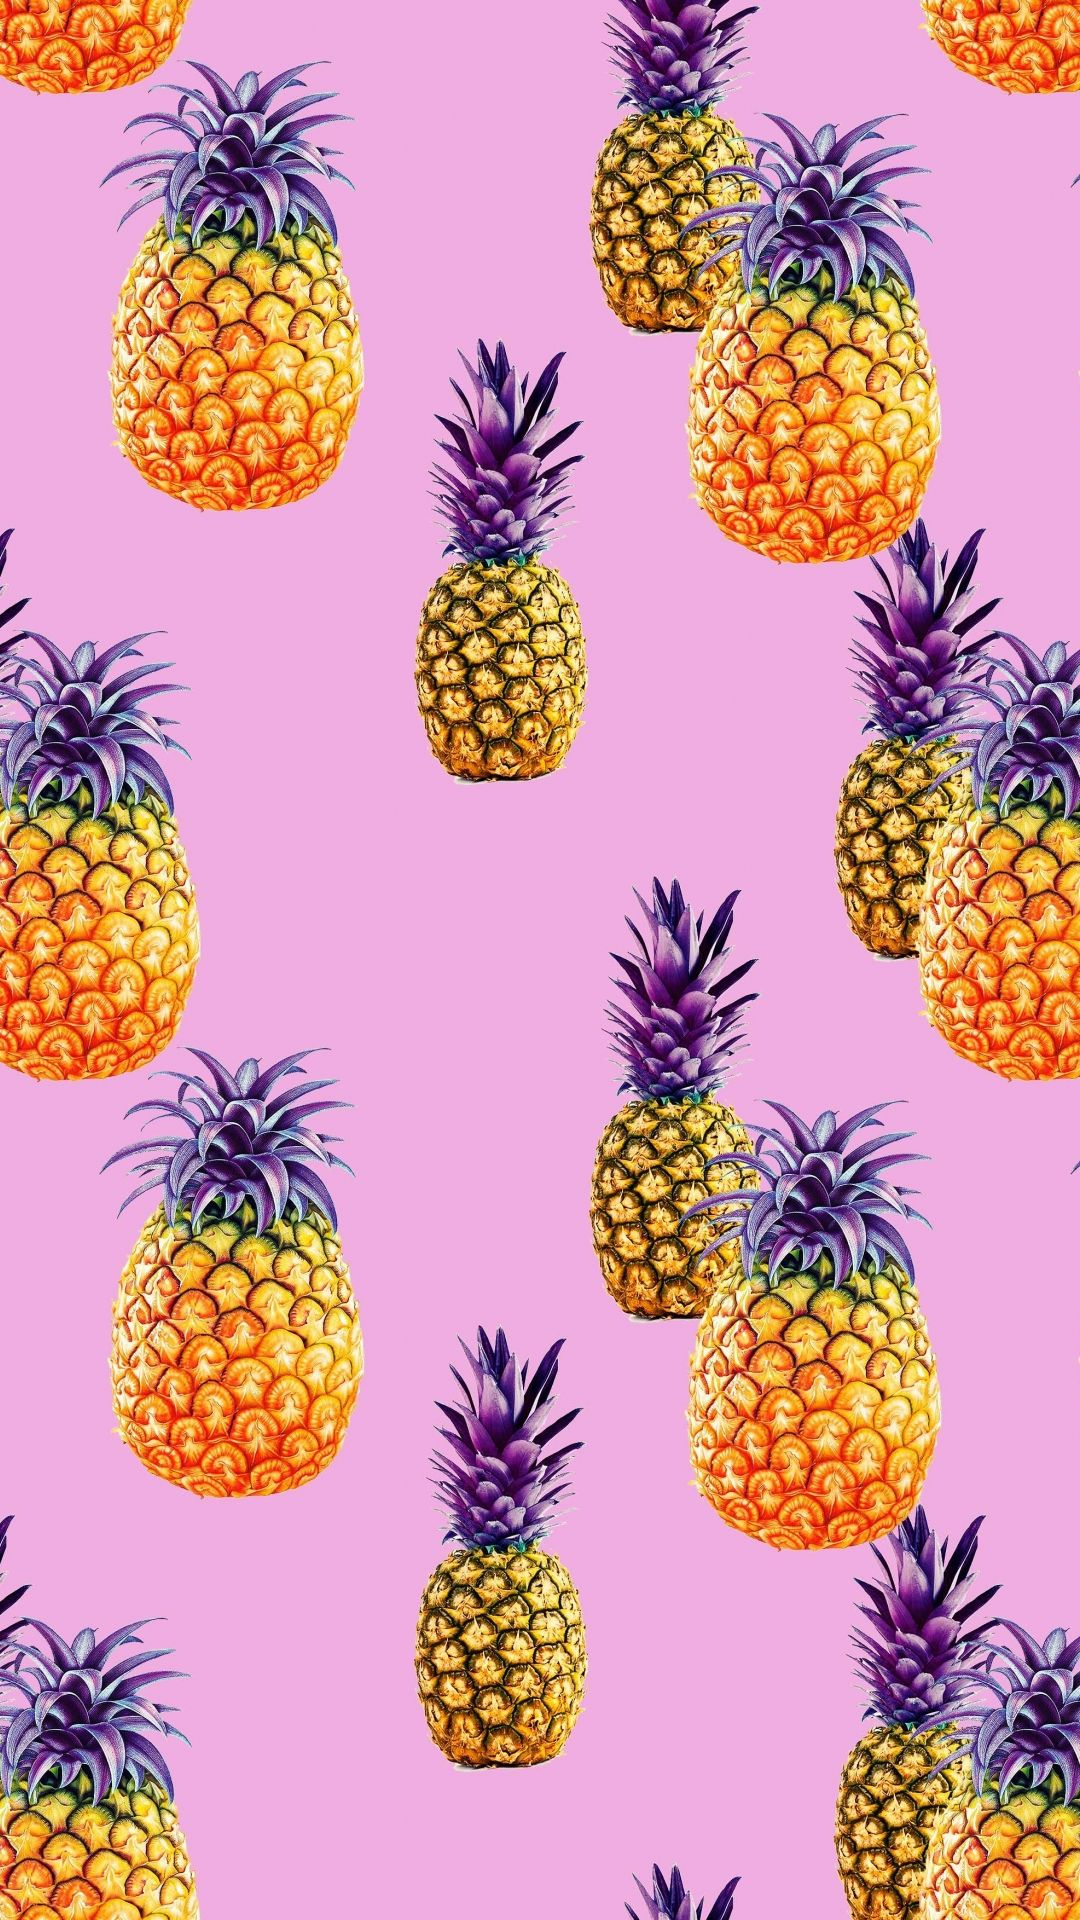 Pineapple Picture In Wallpaper